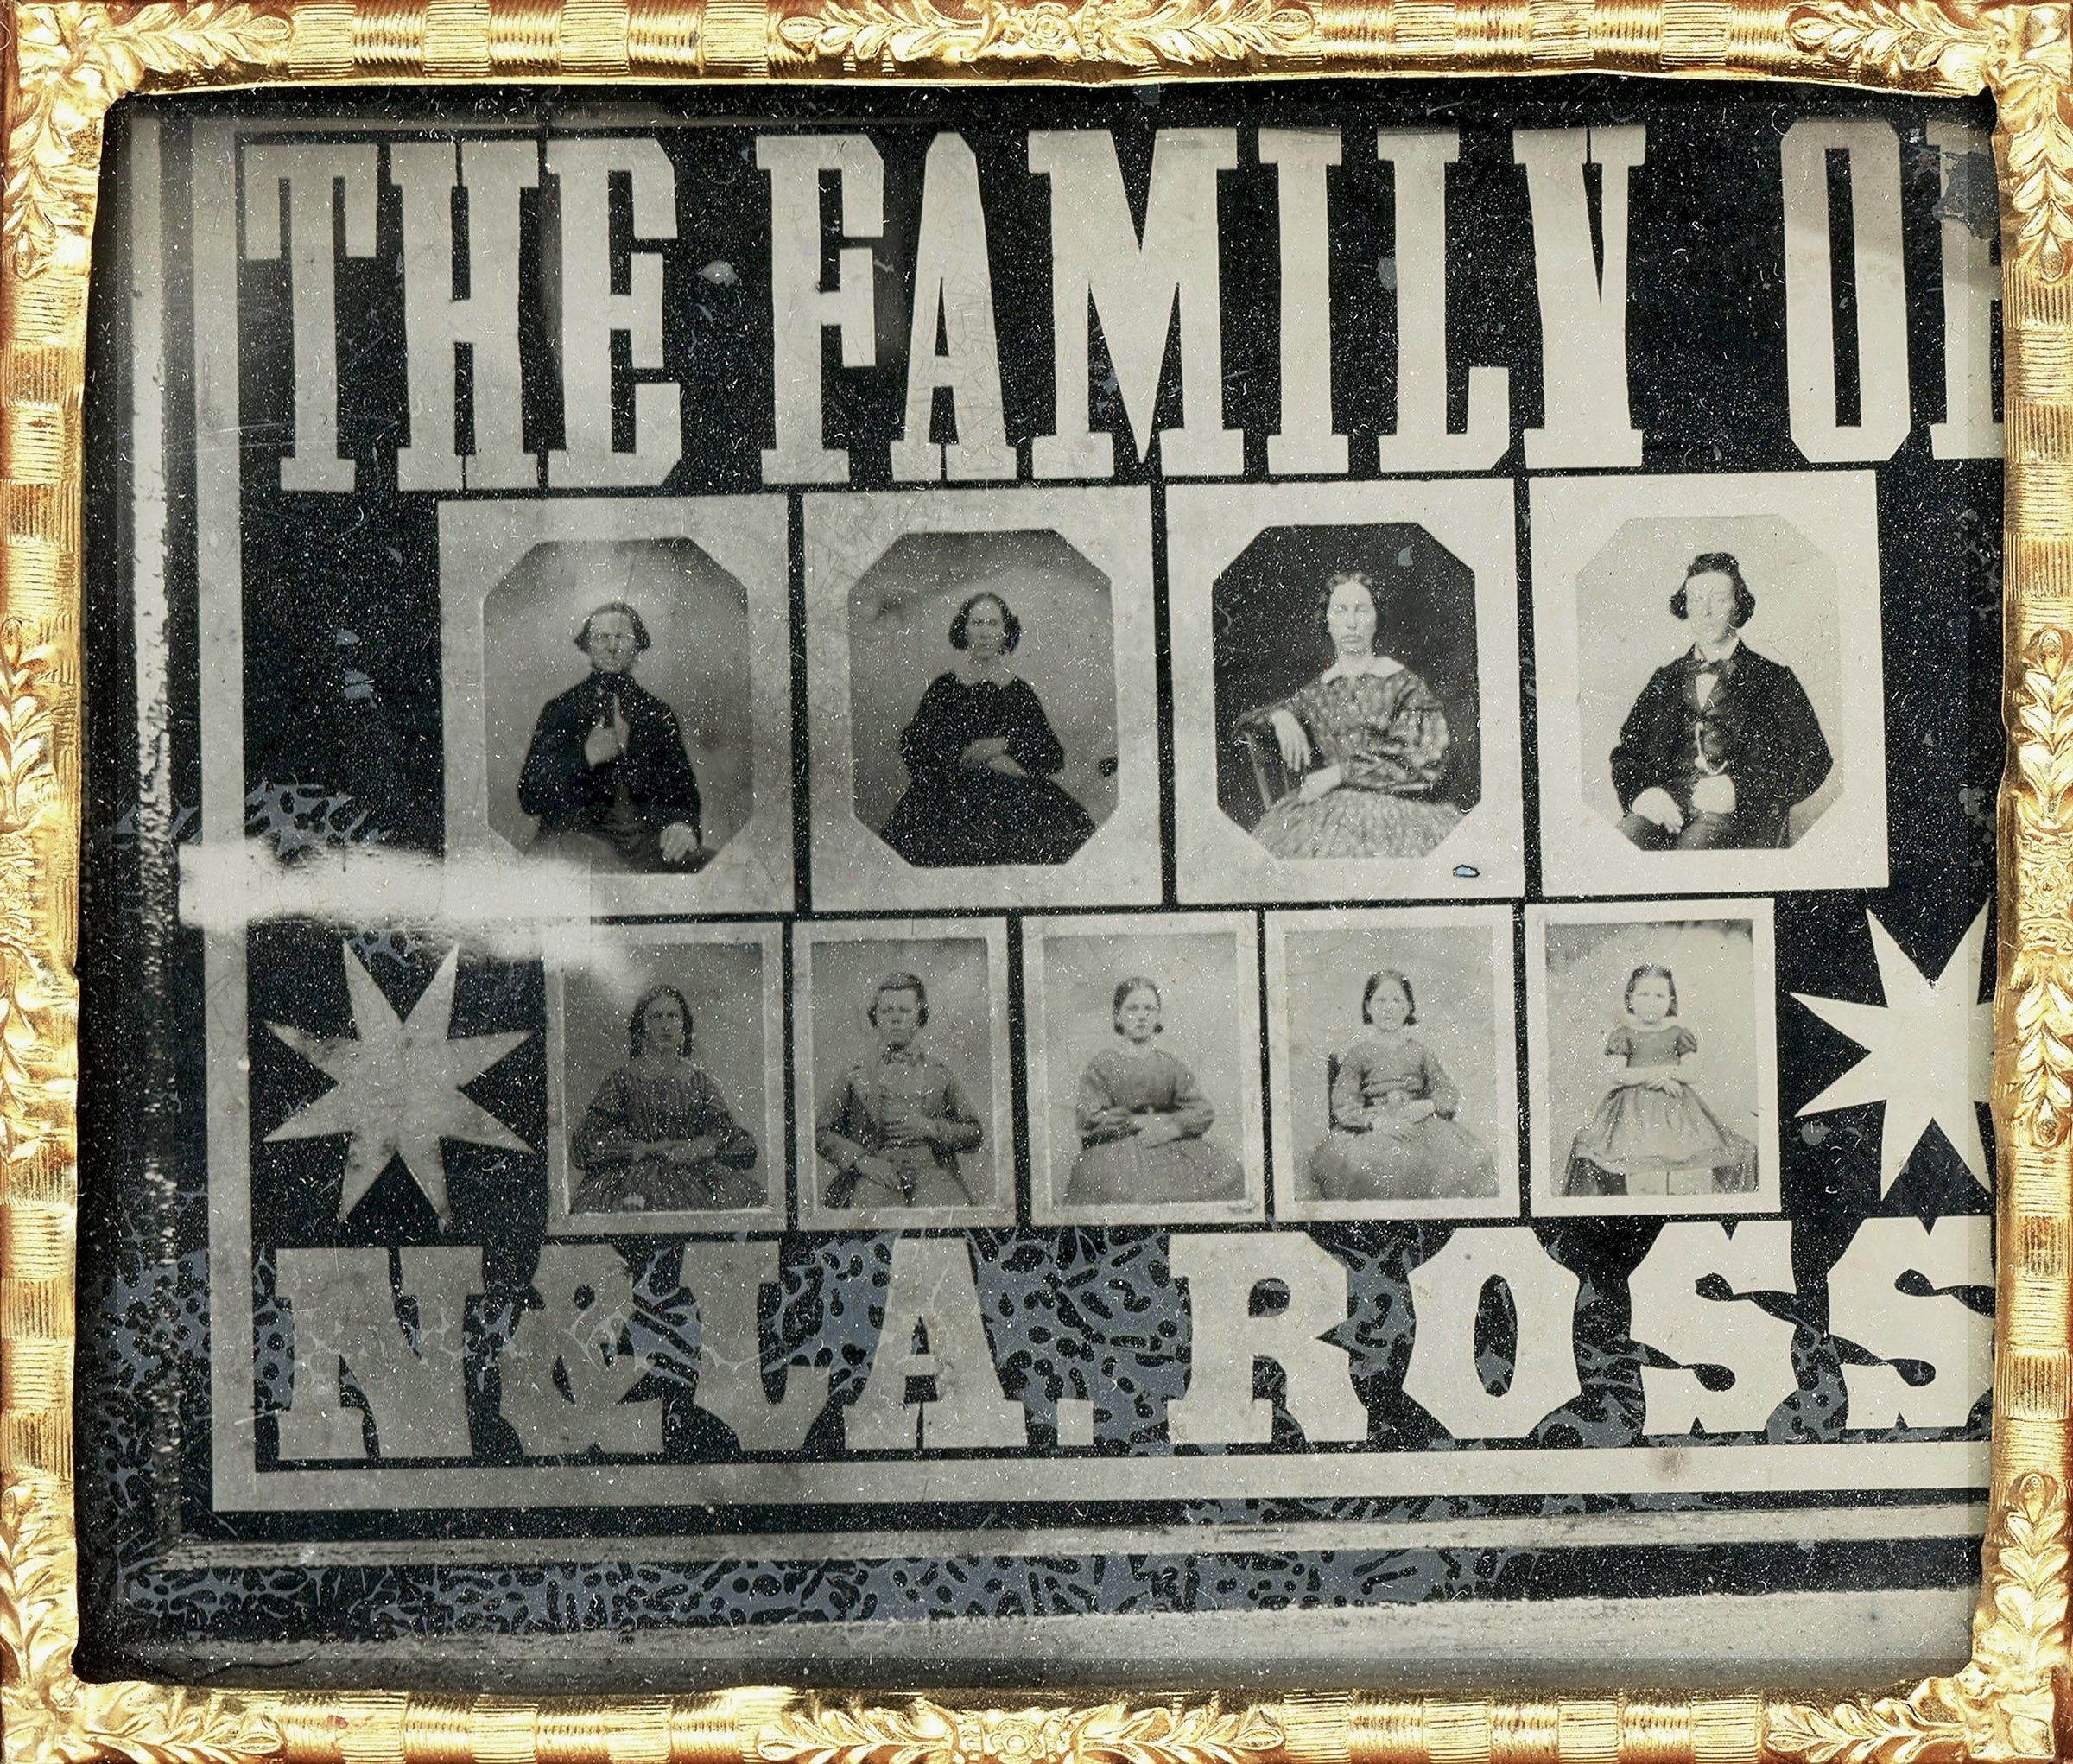 Unidentified photographer, The Family of N & LA. Ross, United States, probably New England, c. 1855